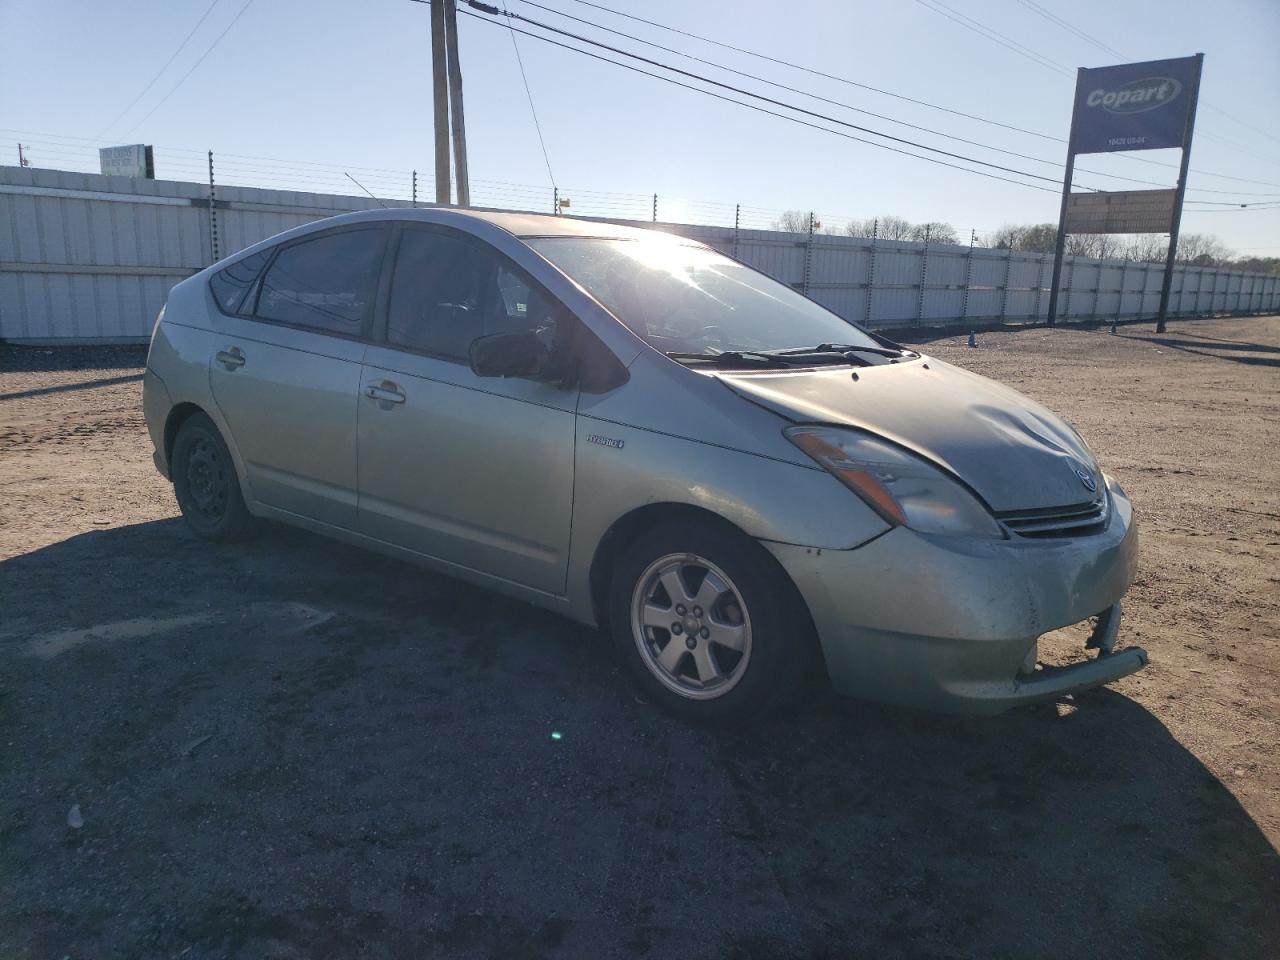 JTDKB20U983****** Salvage and Wrecked 2008 Toyota Prius in Alabama State